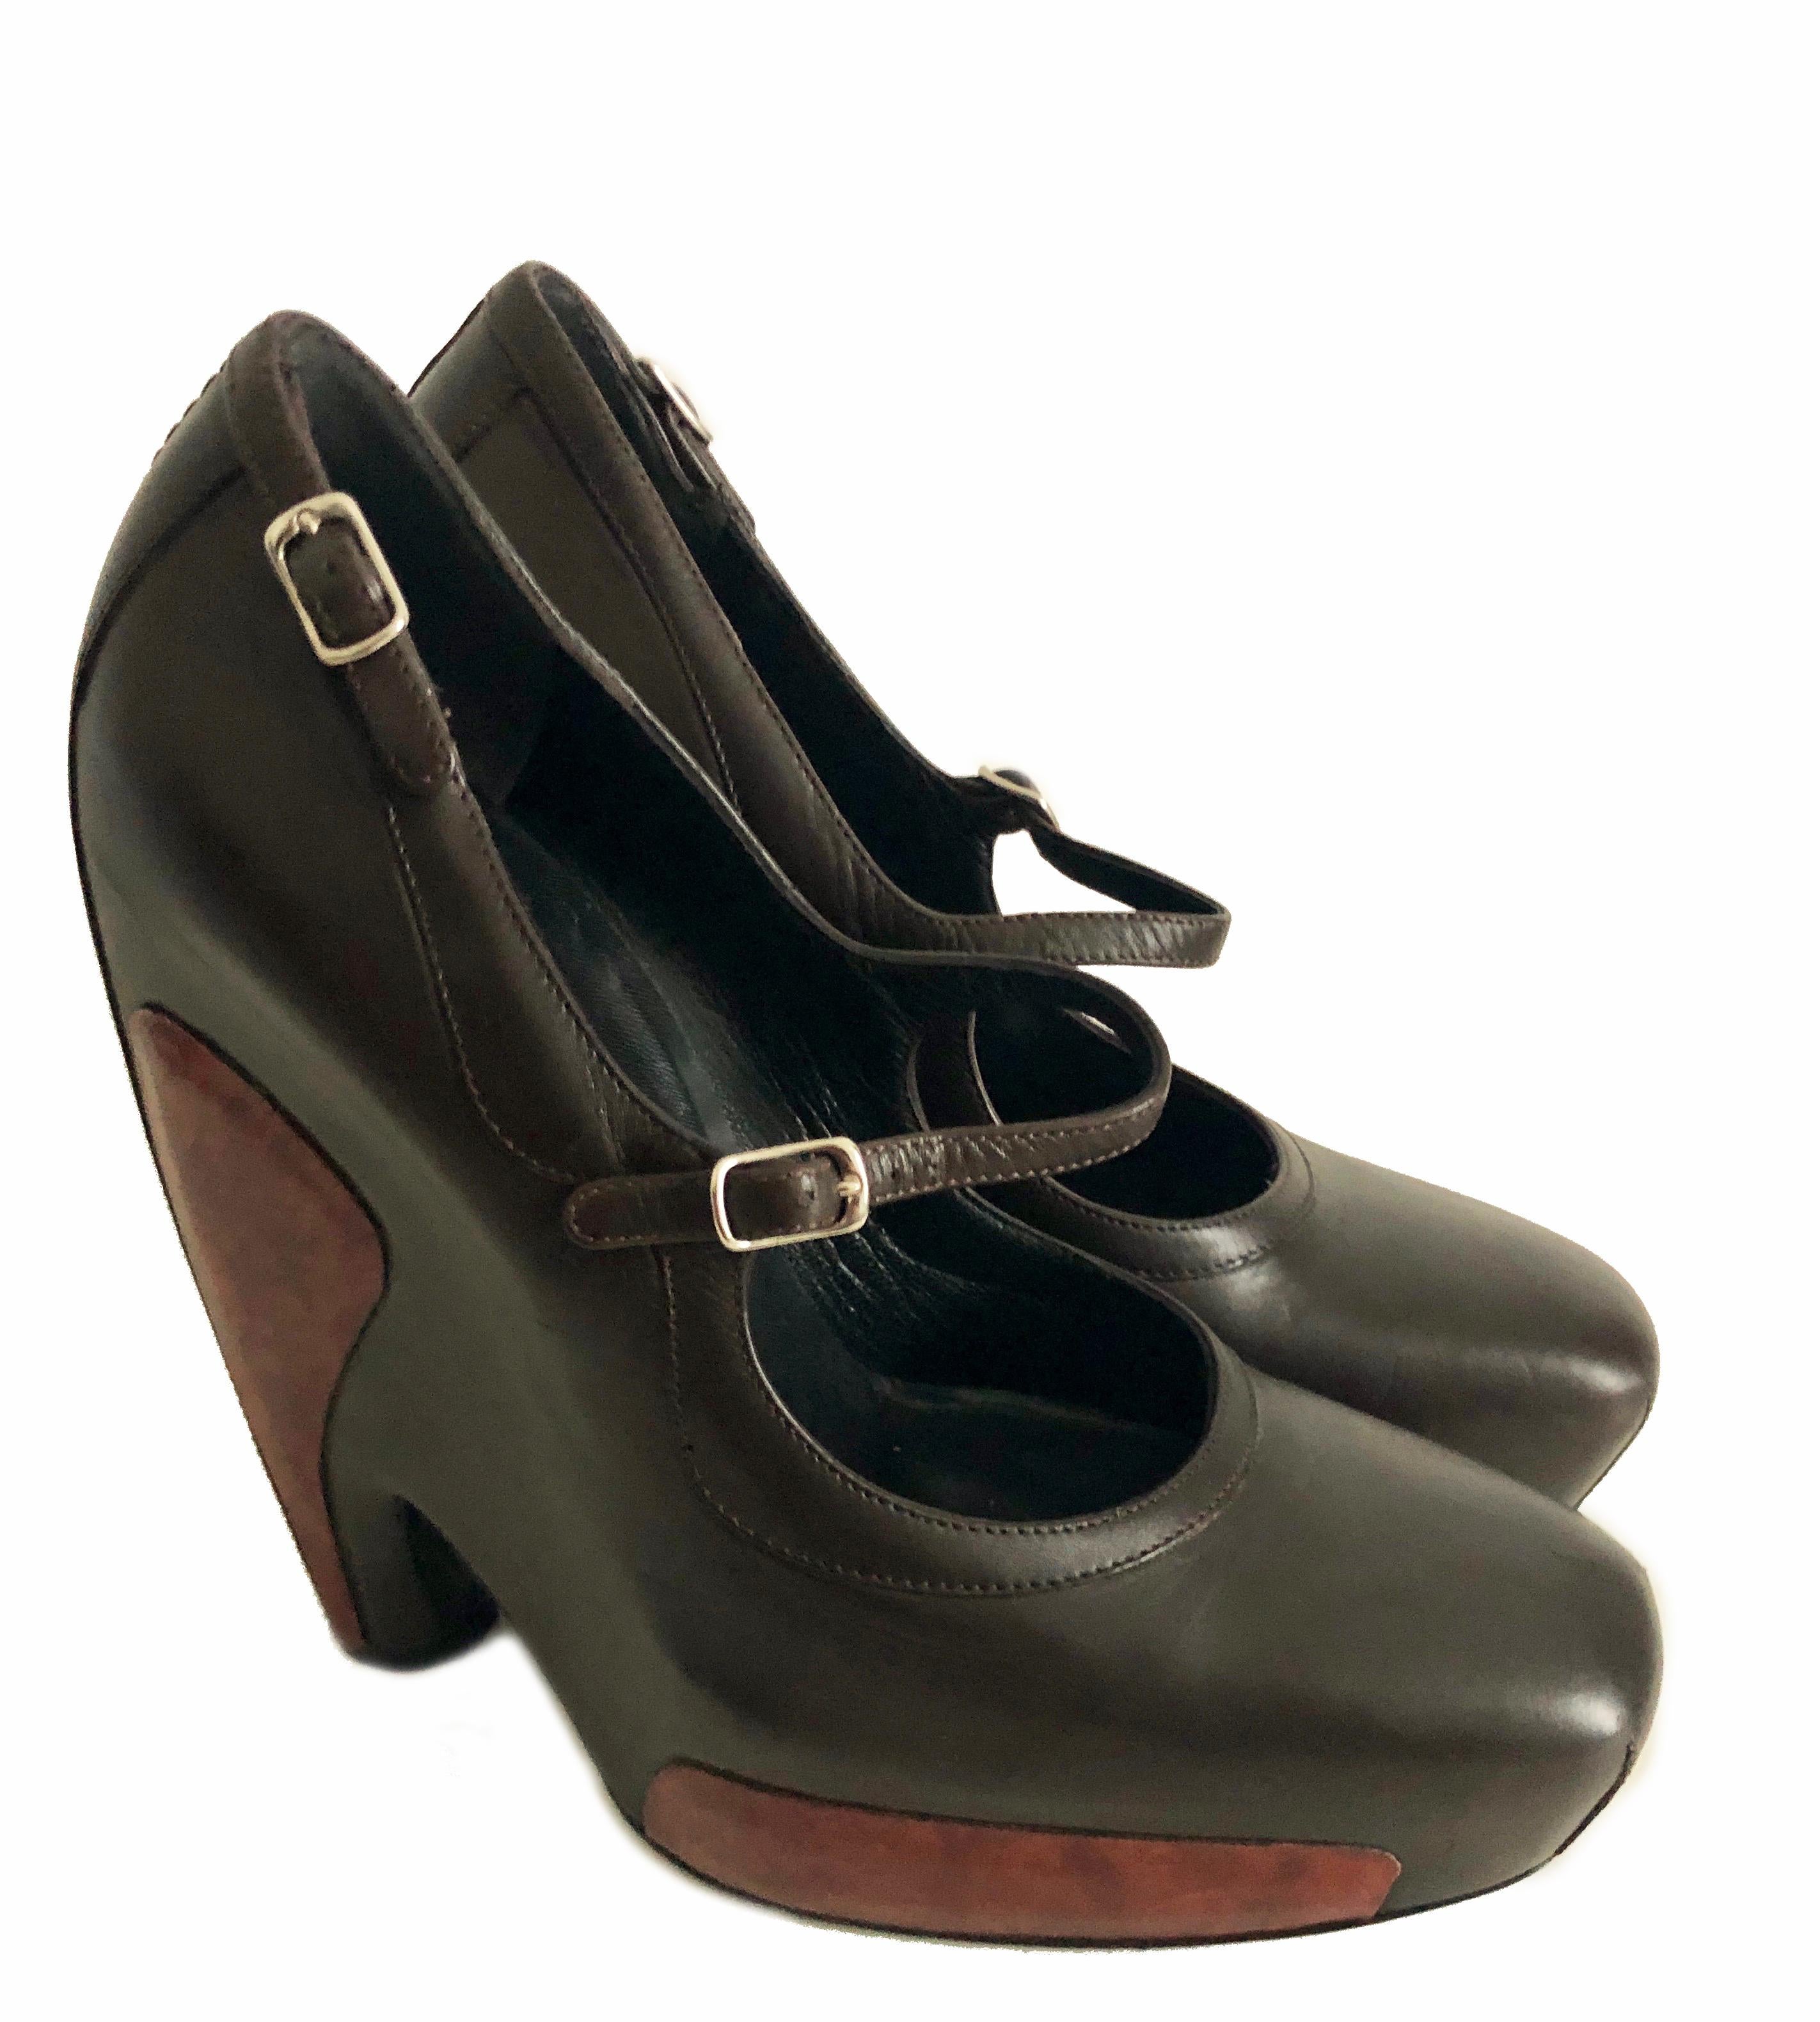 Iconic Balenciaga Mary Jane Brown Leather Platforms with Wood Inserts F/W 2006 by Nicolas Ghesquière.  Tagged size 38, with heels measuring appx 6in H.  Preowned with signs of prior wear to soles, some indentations/light scuffs to leather, some